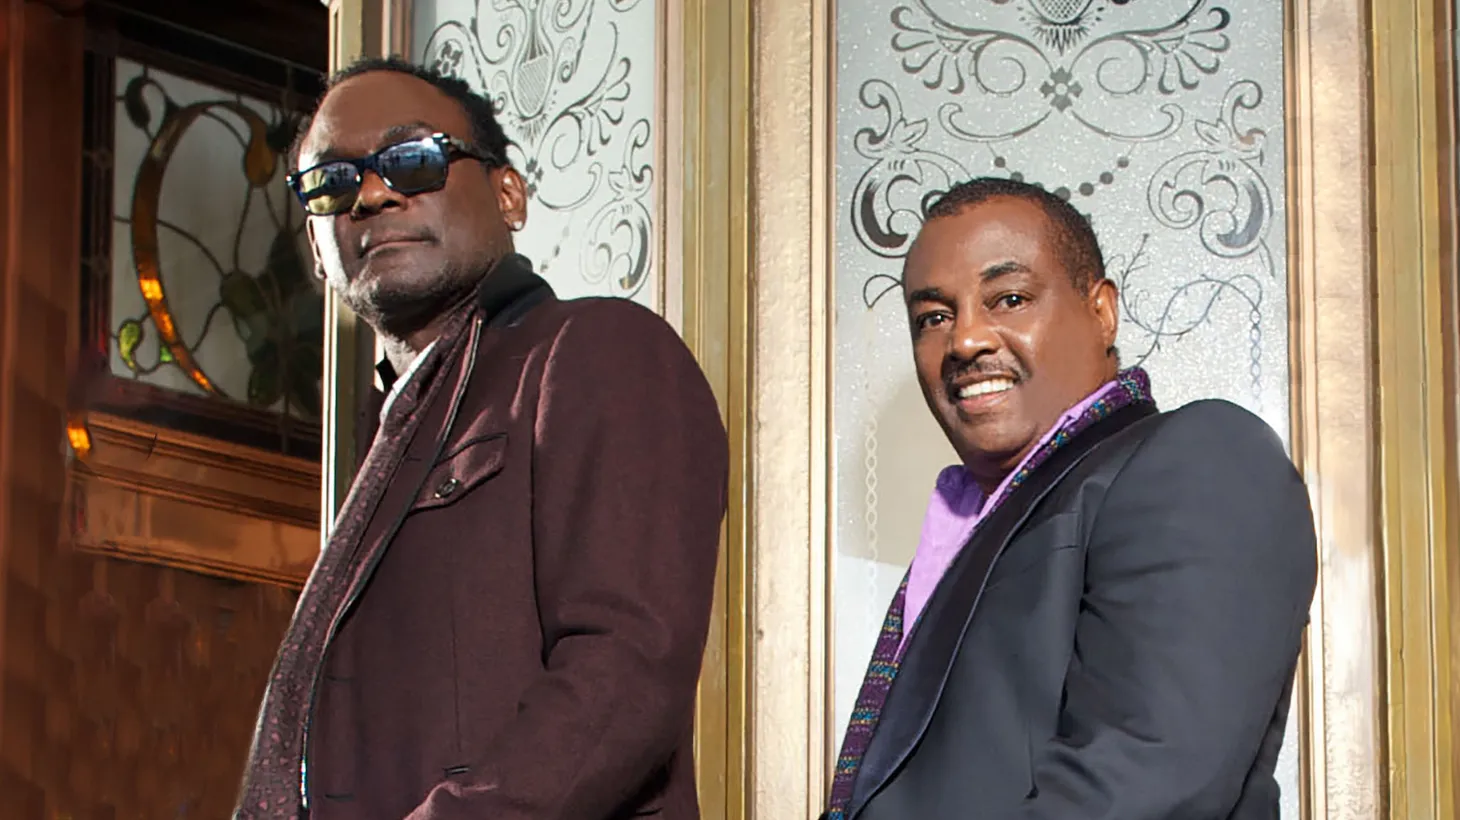 When it comes to R&B, Kool & The Gang , is the longest running group in history and most sampled in their genre. “ Celebration ” is a No. 1 hit immortalized in the Library of Congress National Recording Registry.